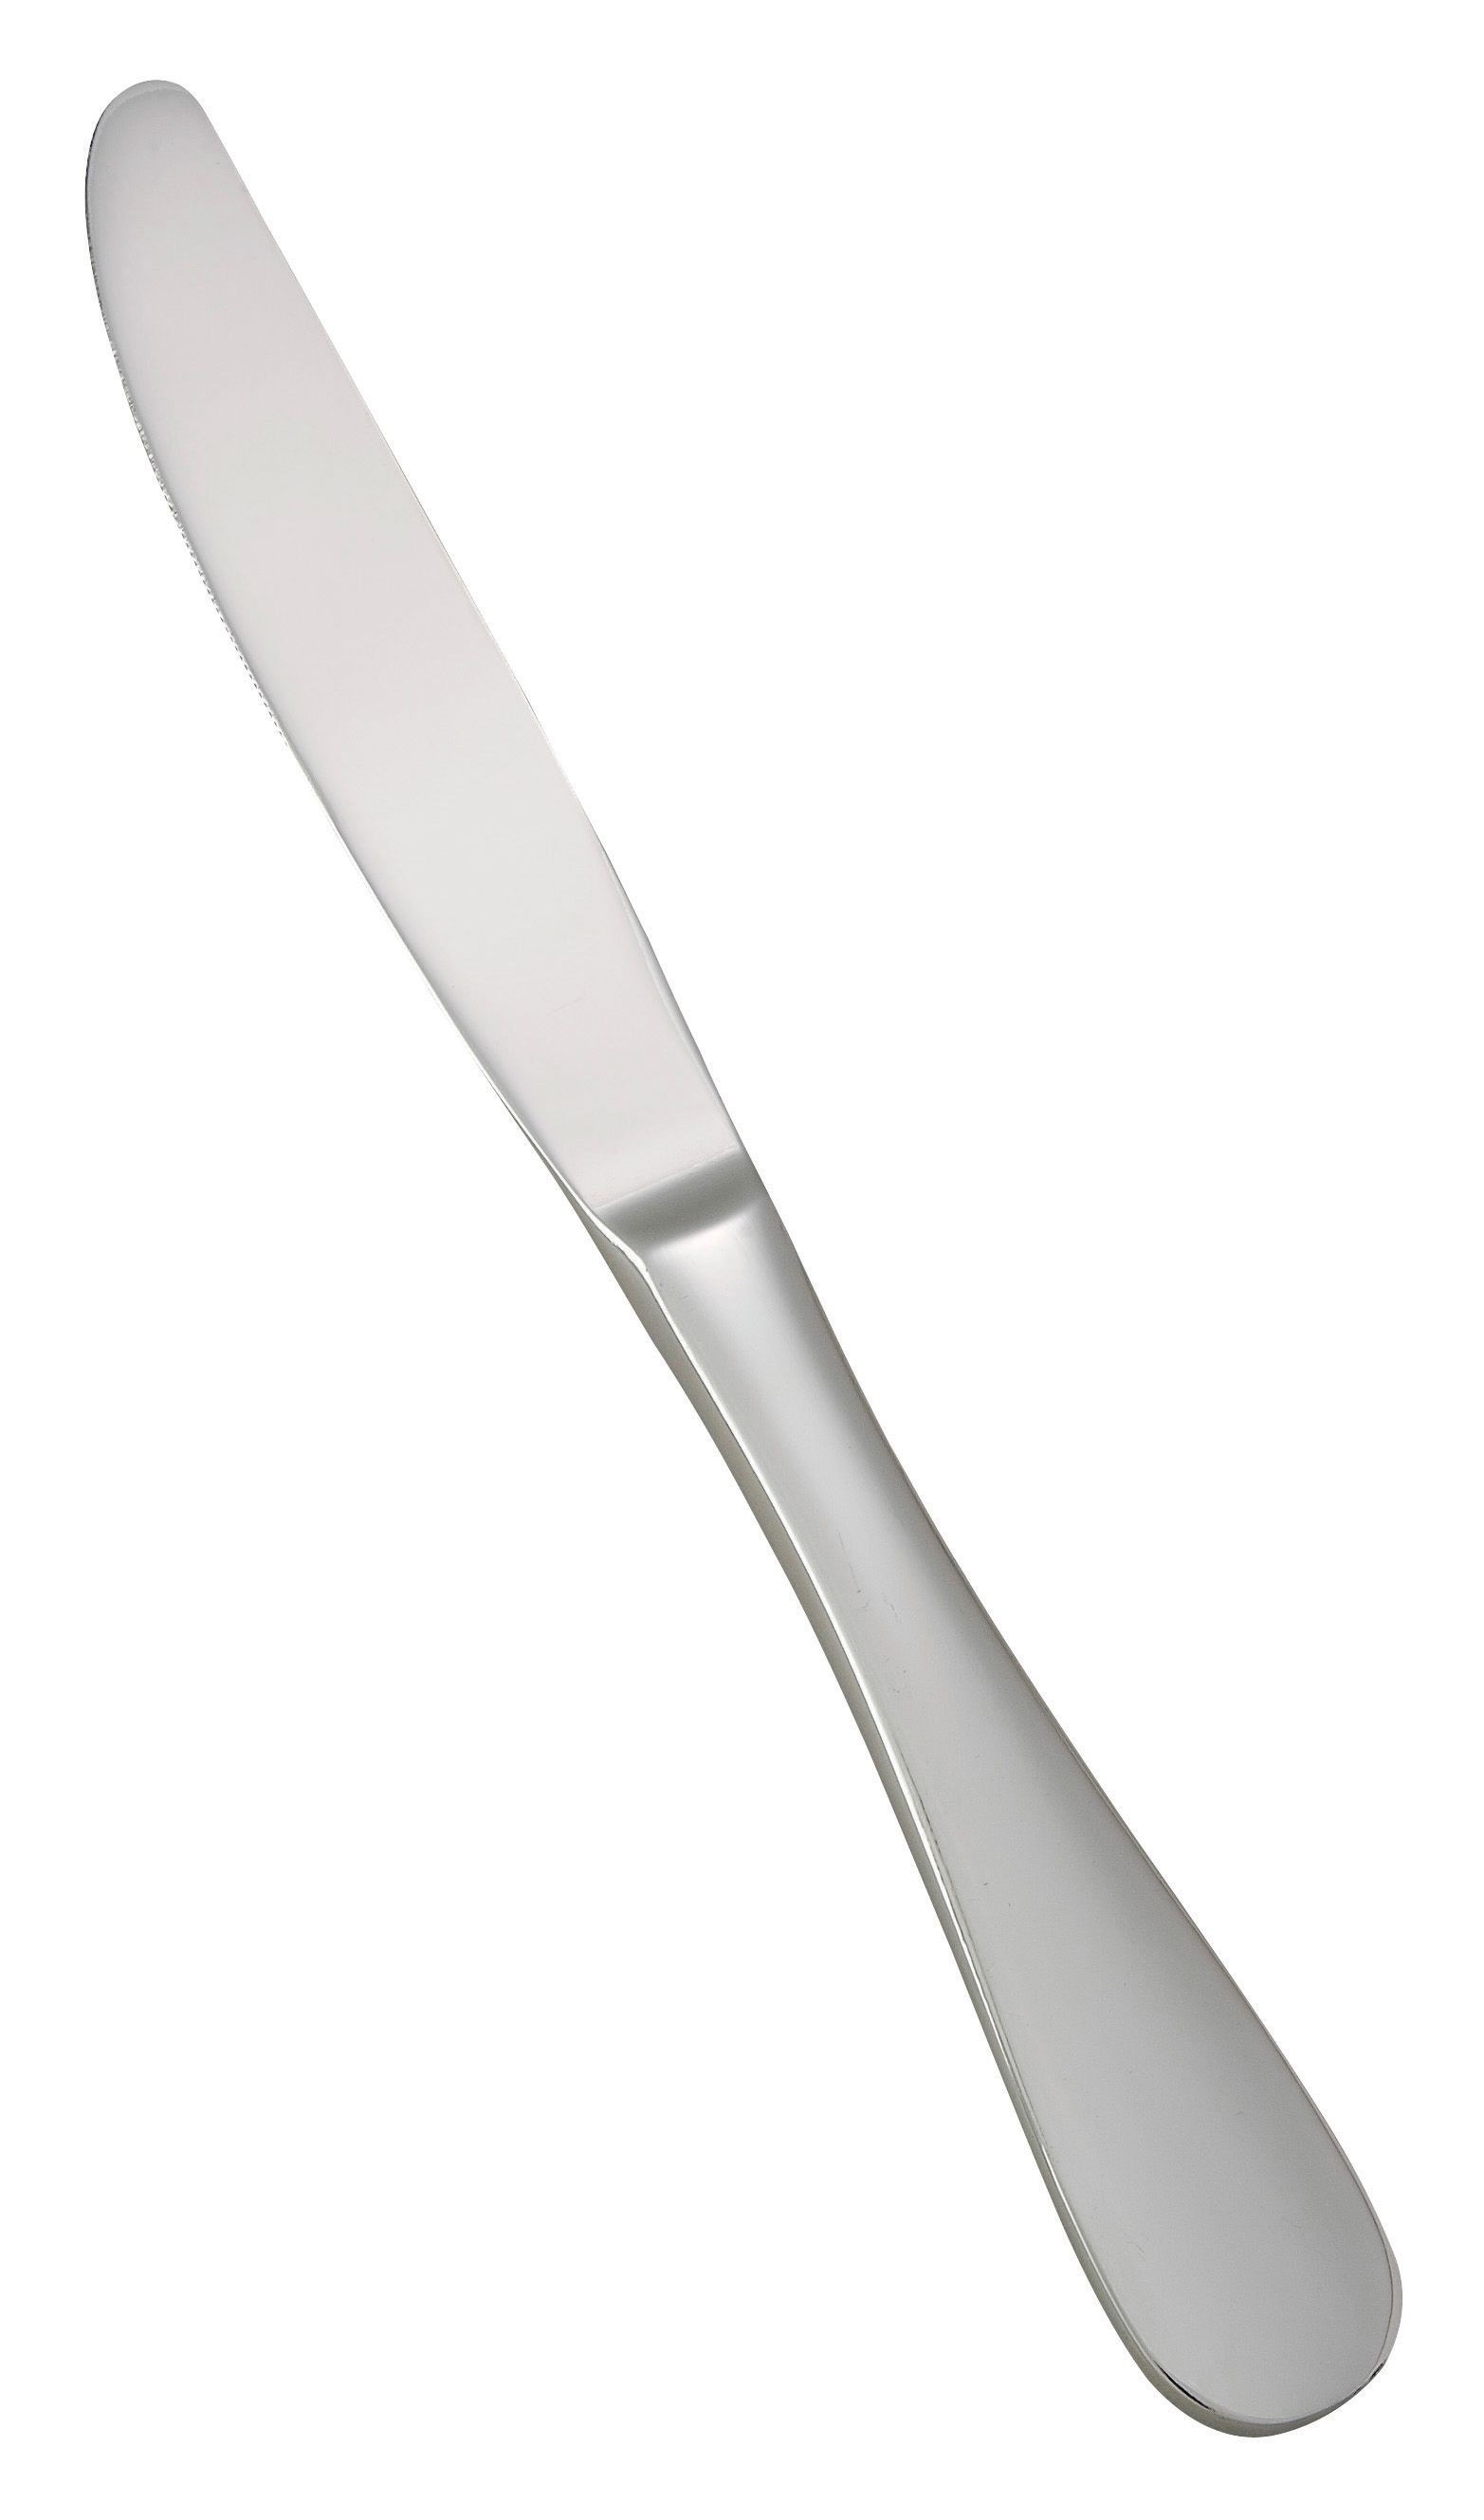 Winco 0037-08 Venice Extra Heavy Stainless Steel Dinner Knife (12/Pack)